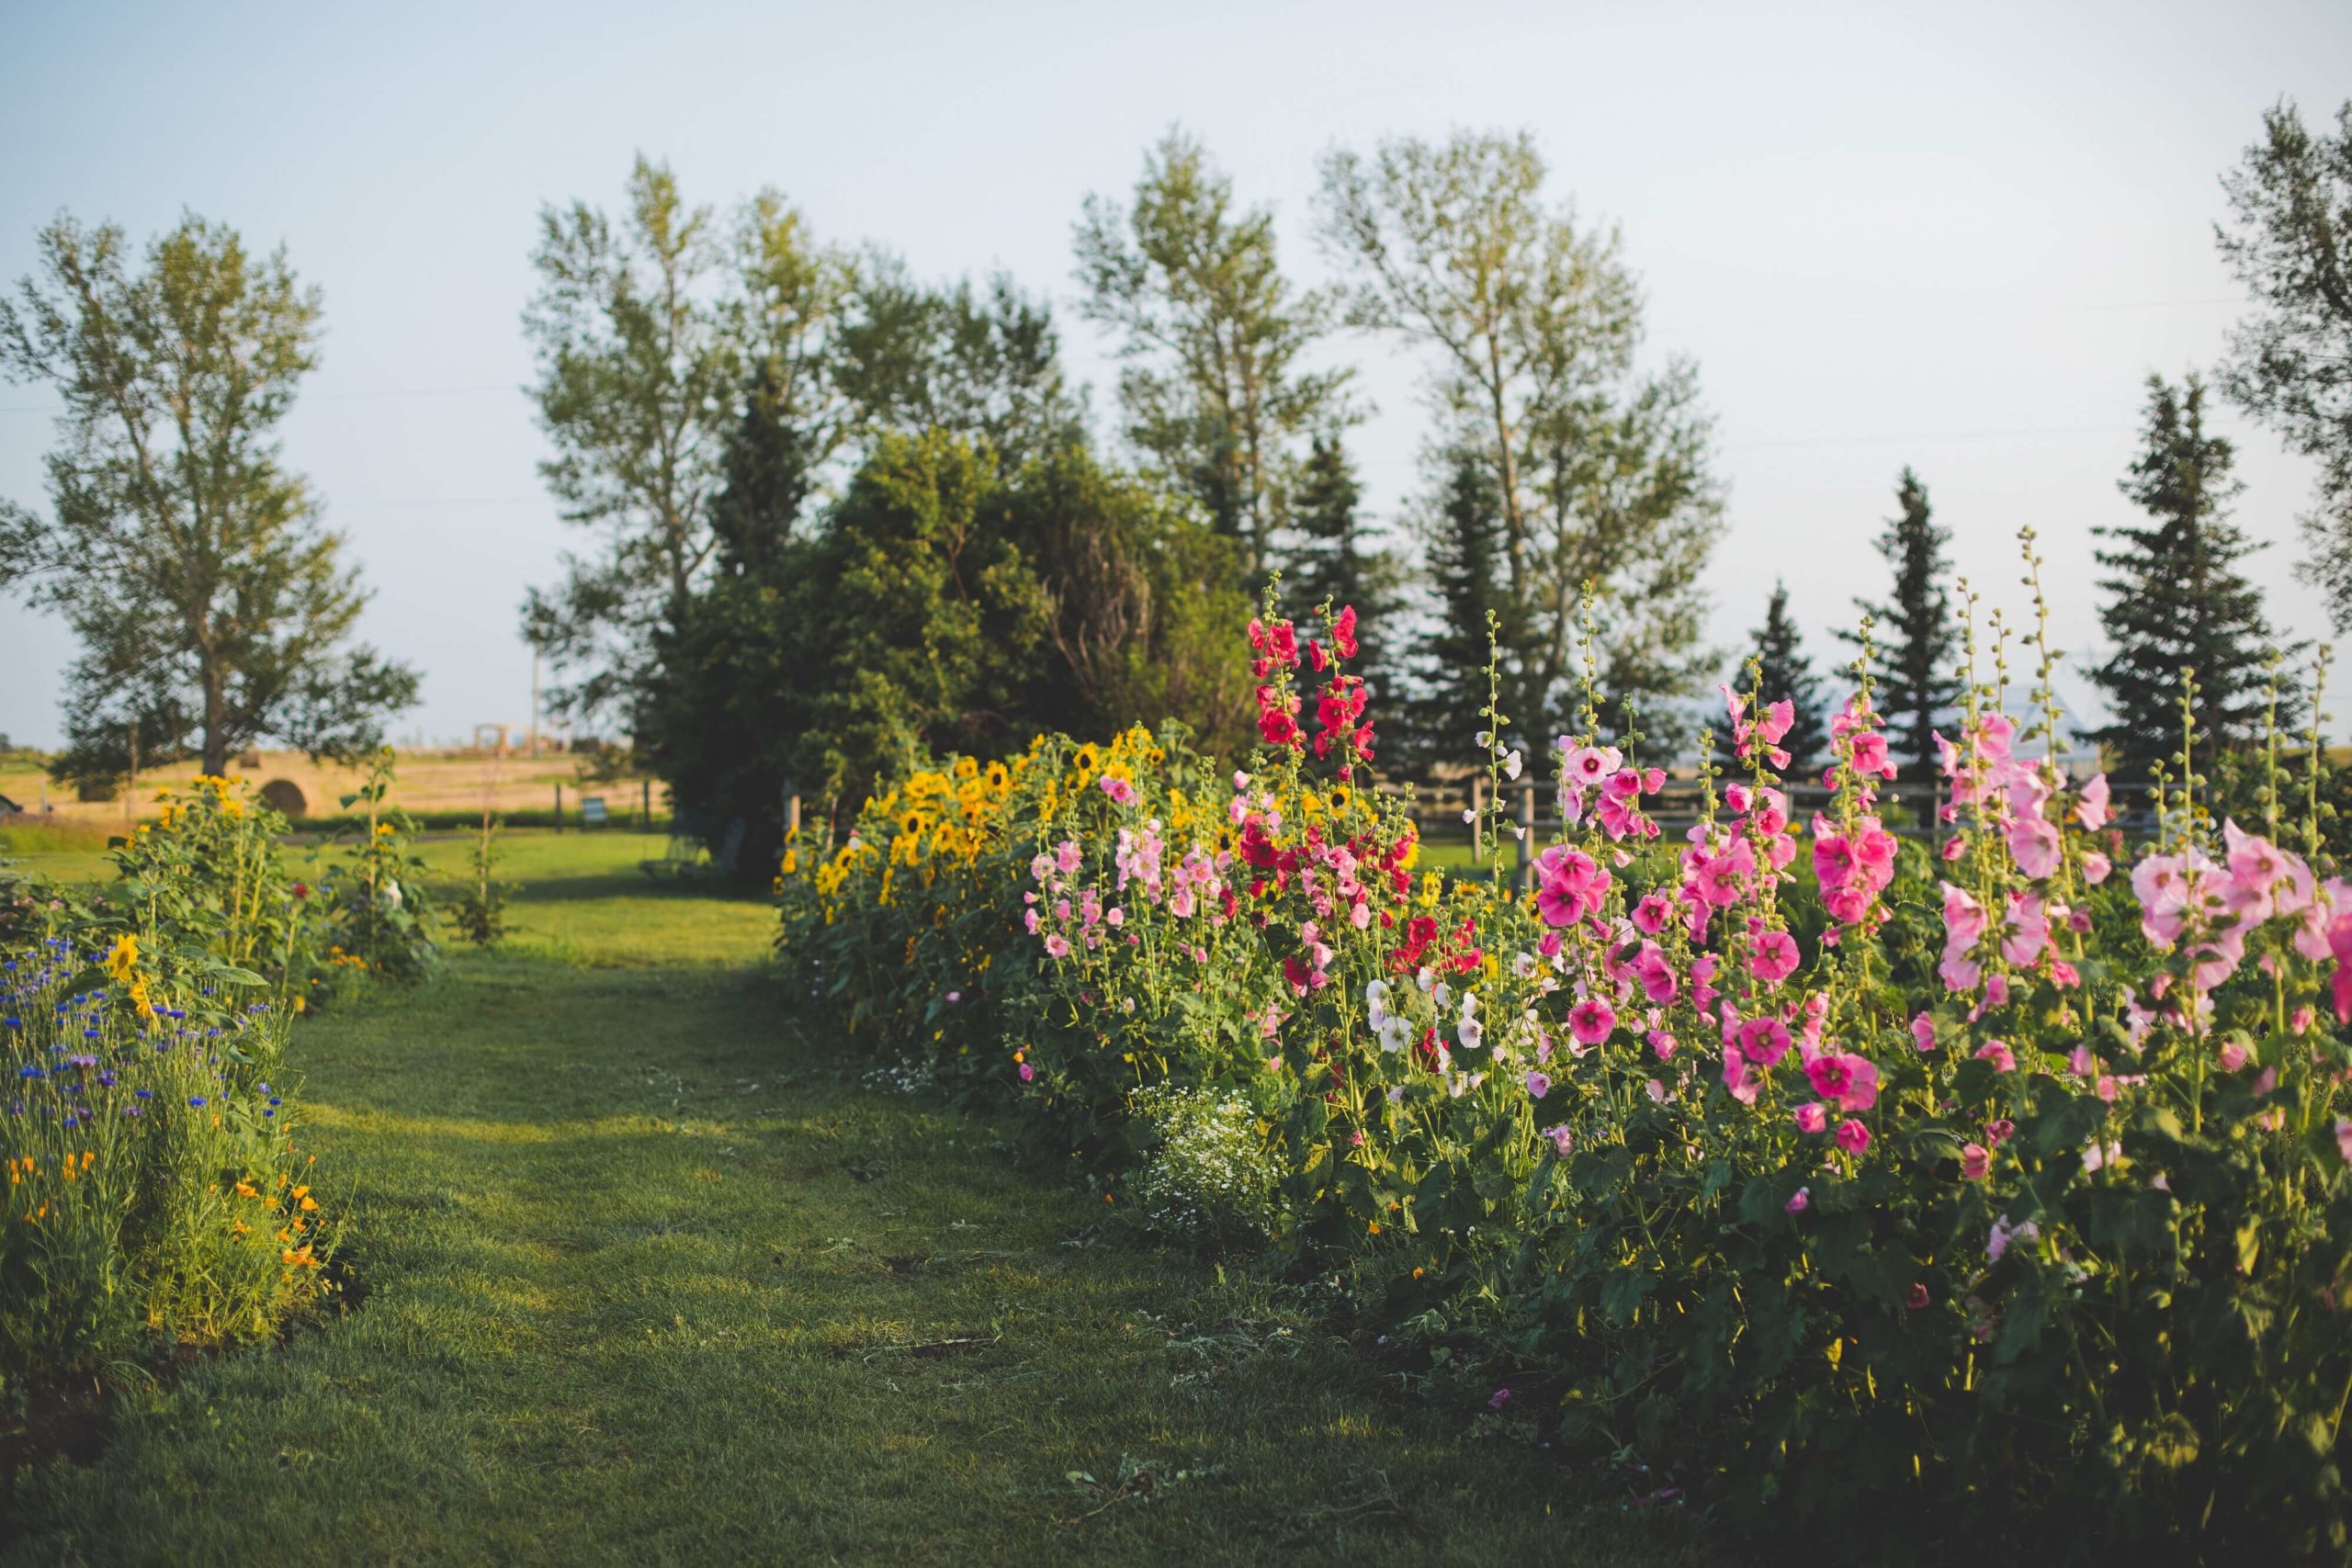 A garden full of colorful flowers in the middle of a Calgary field.